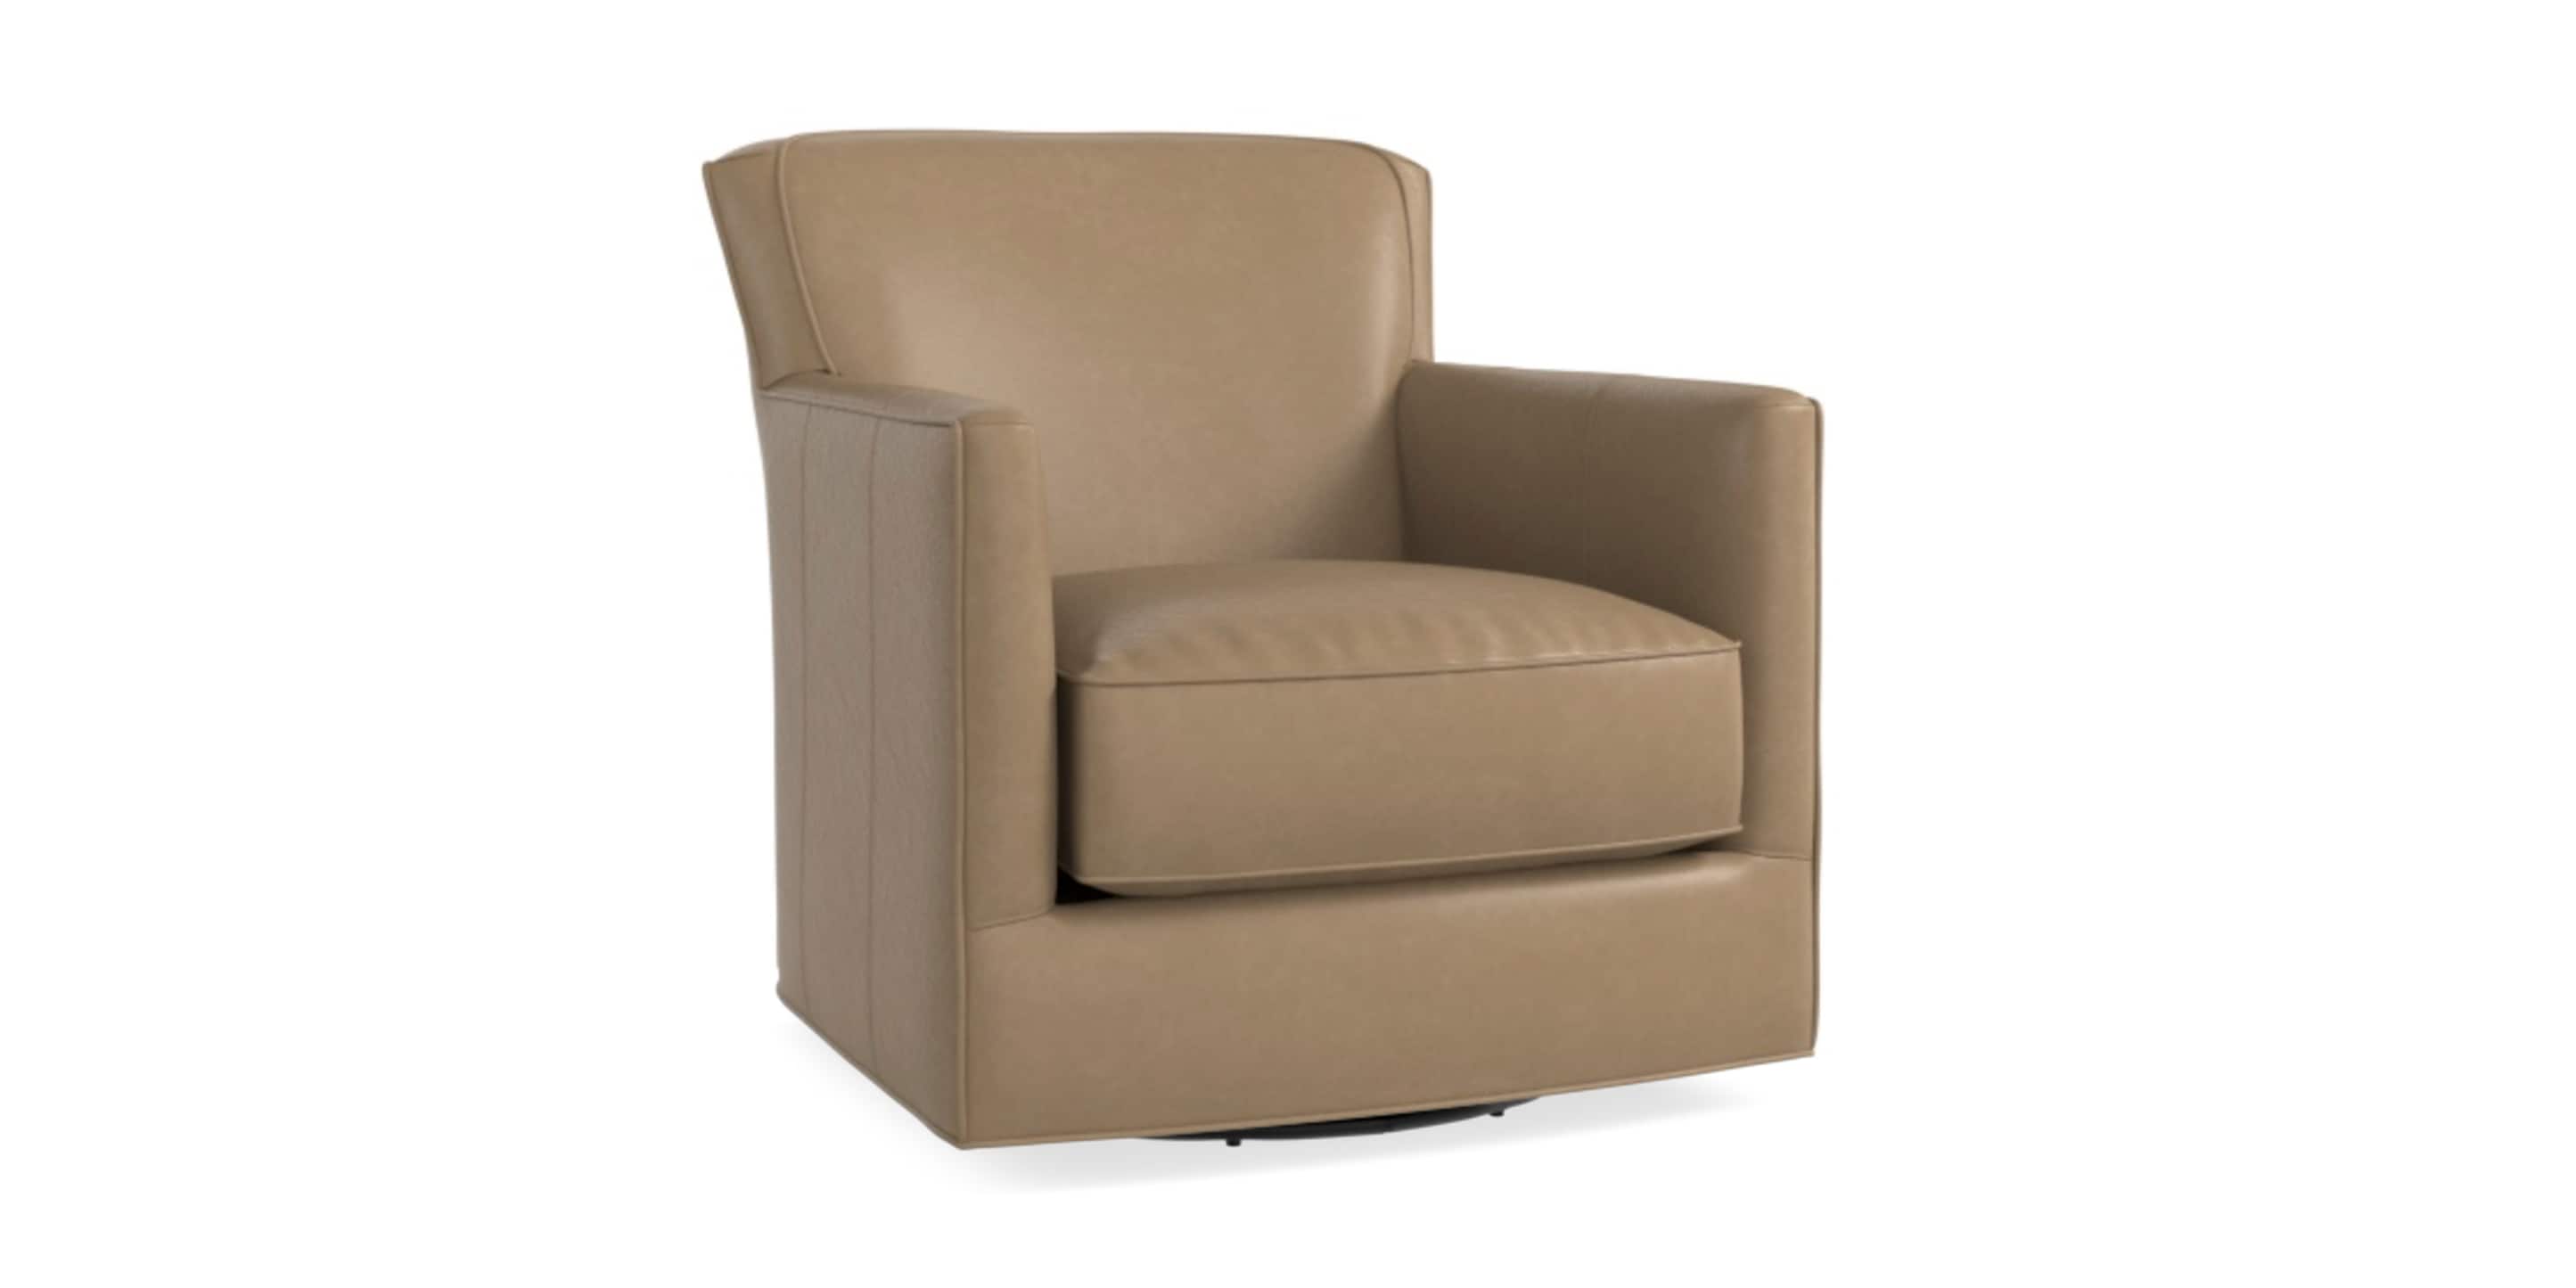 New American Living Leather Swivel Glider